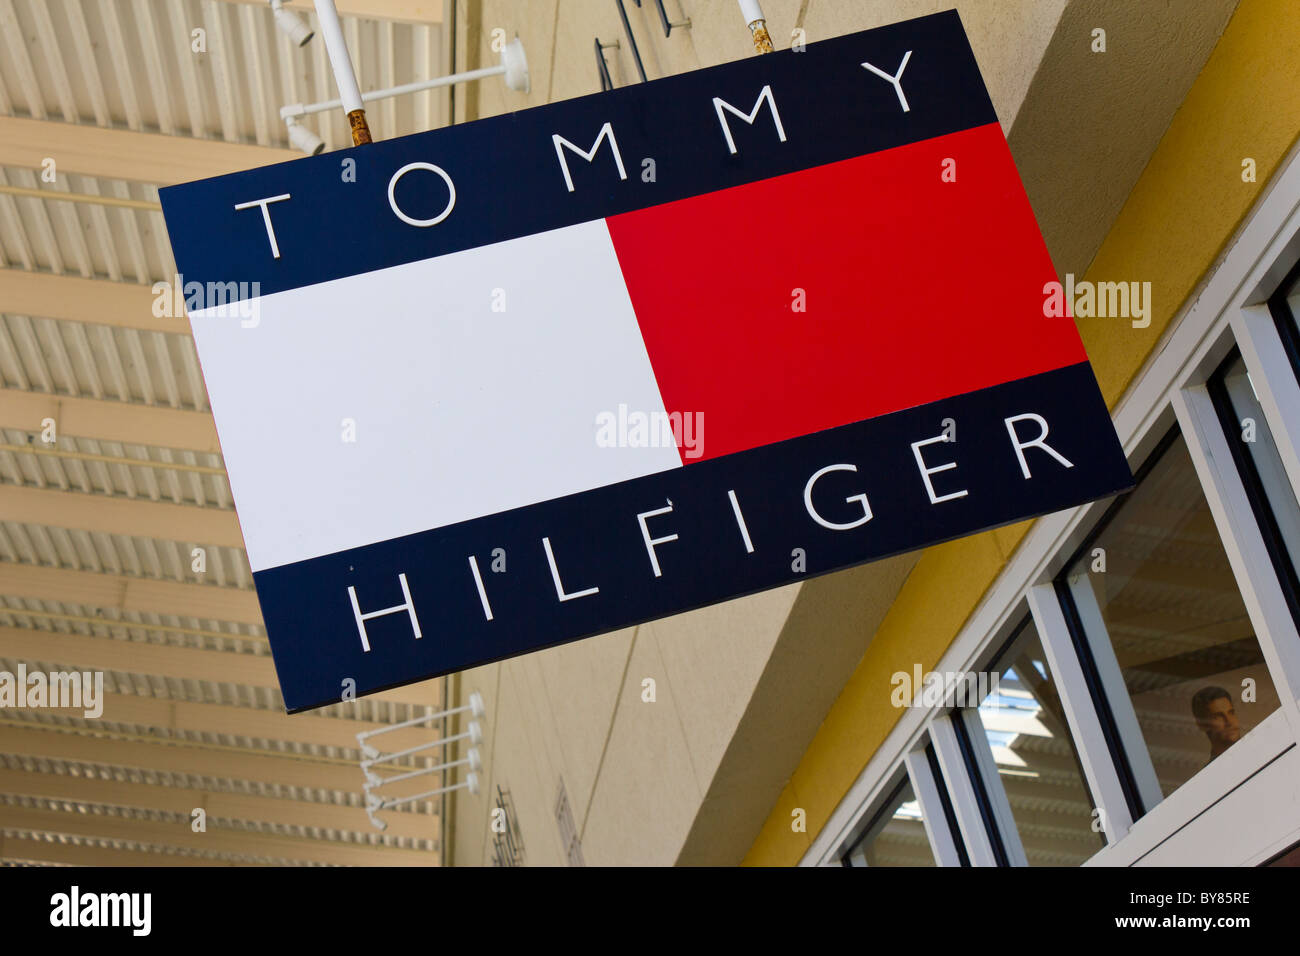 Tommy hilfiger shop hi-res stock photography and images - Alamy